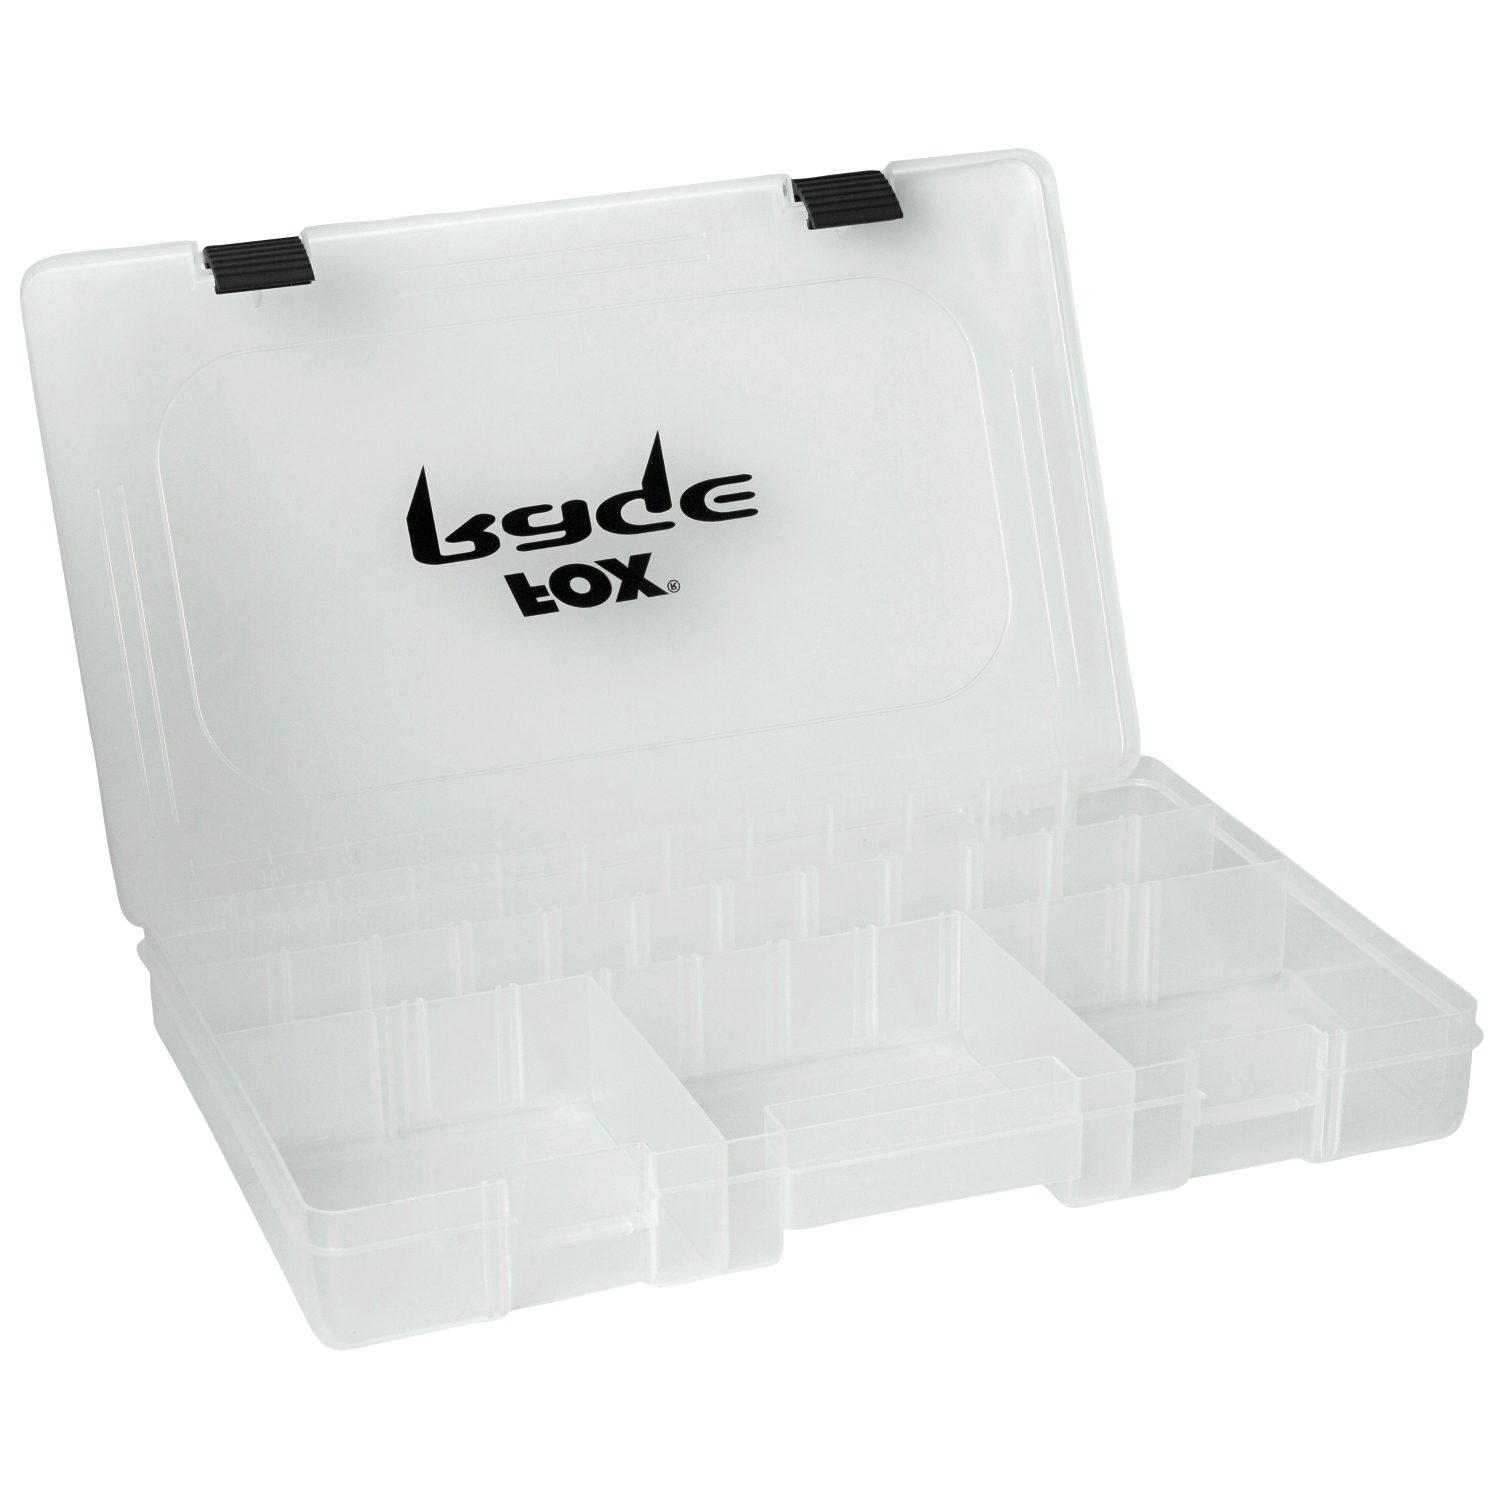 Fox Rage Tackle Box large & shallow) at low prices